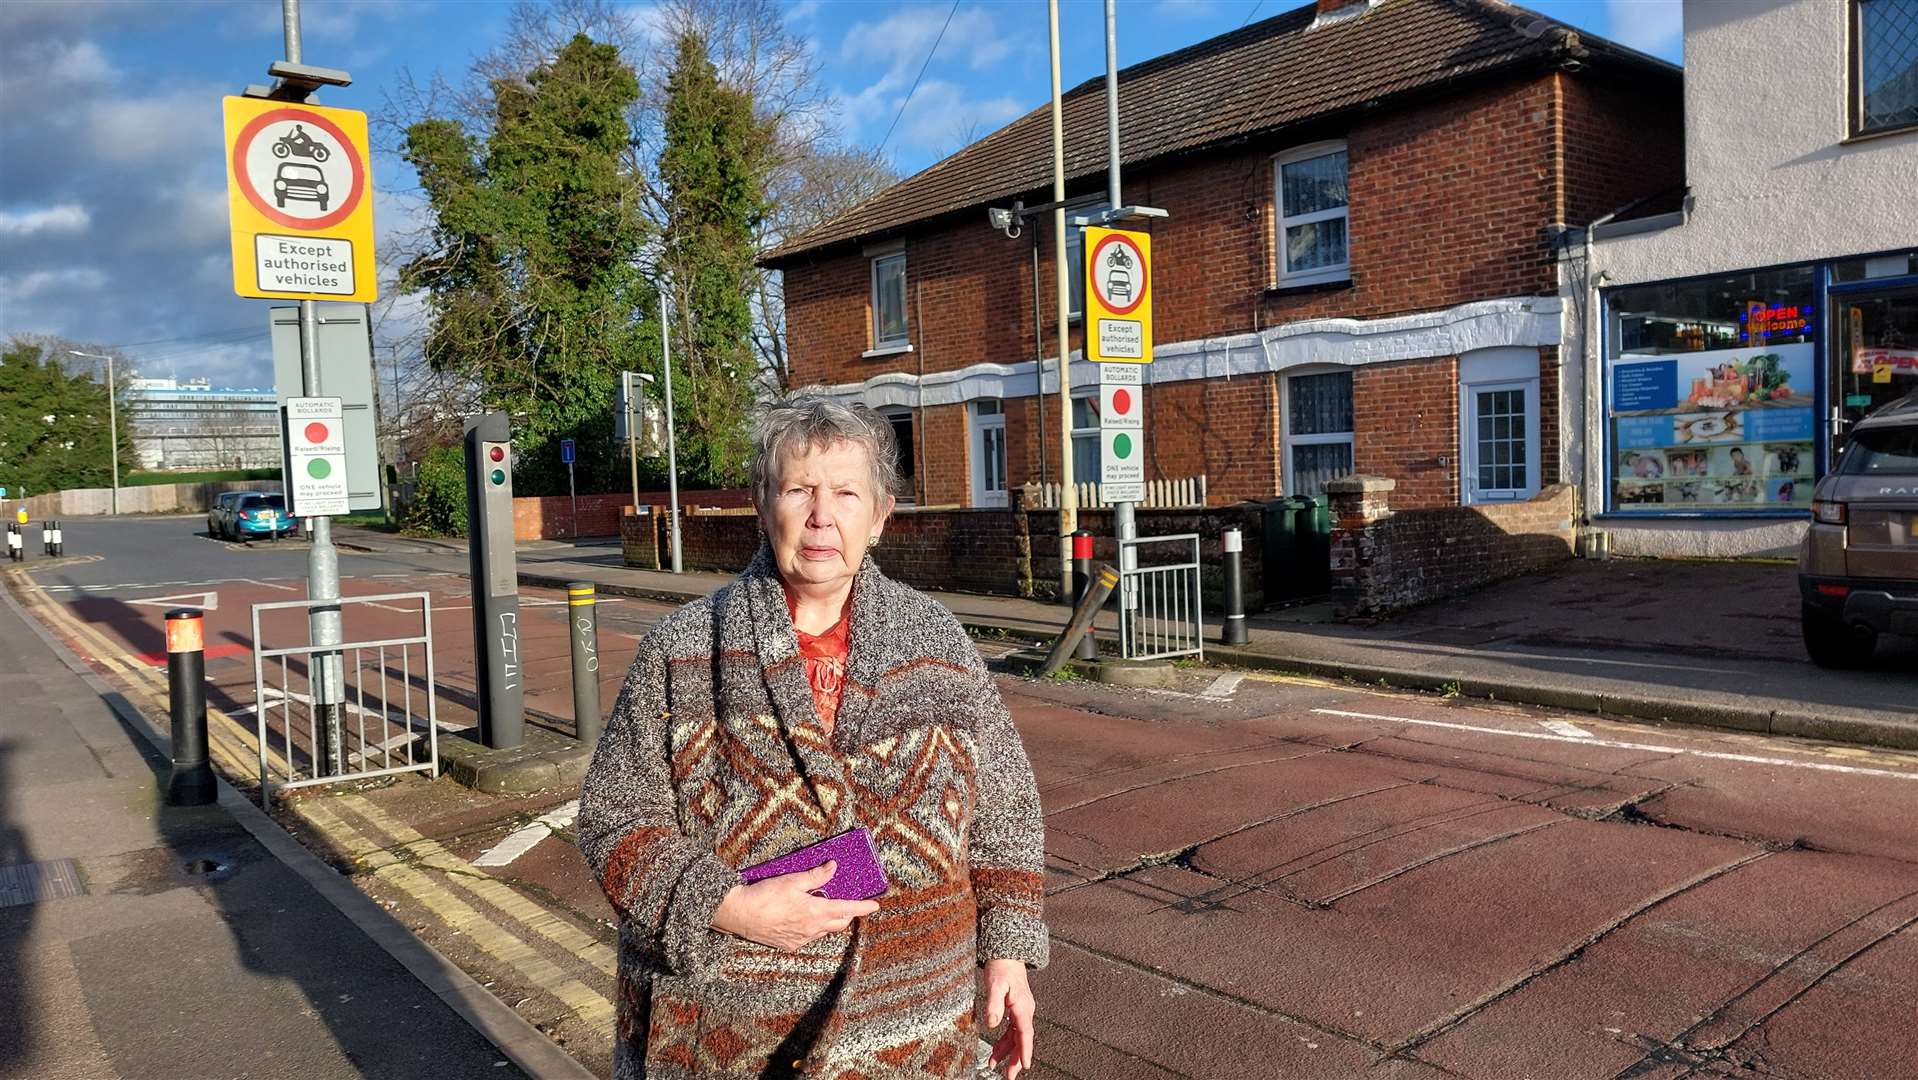 Mayor of Ashford, Cllr Jenny Webb is calling for the speed limit to be reduced, and for the bus gate to be fixed